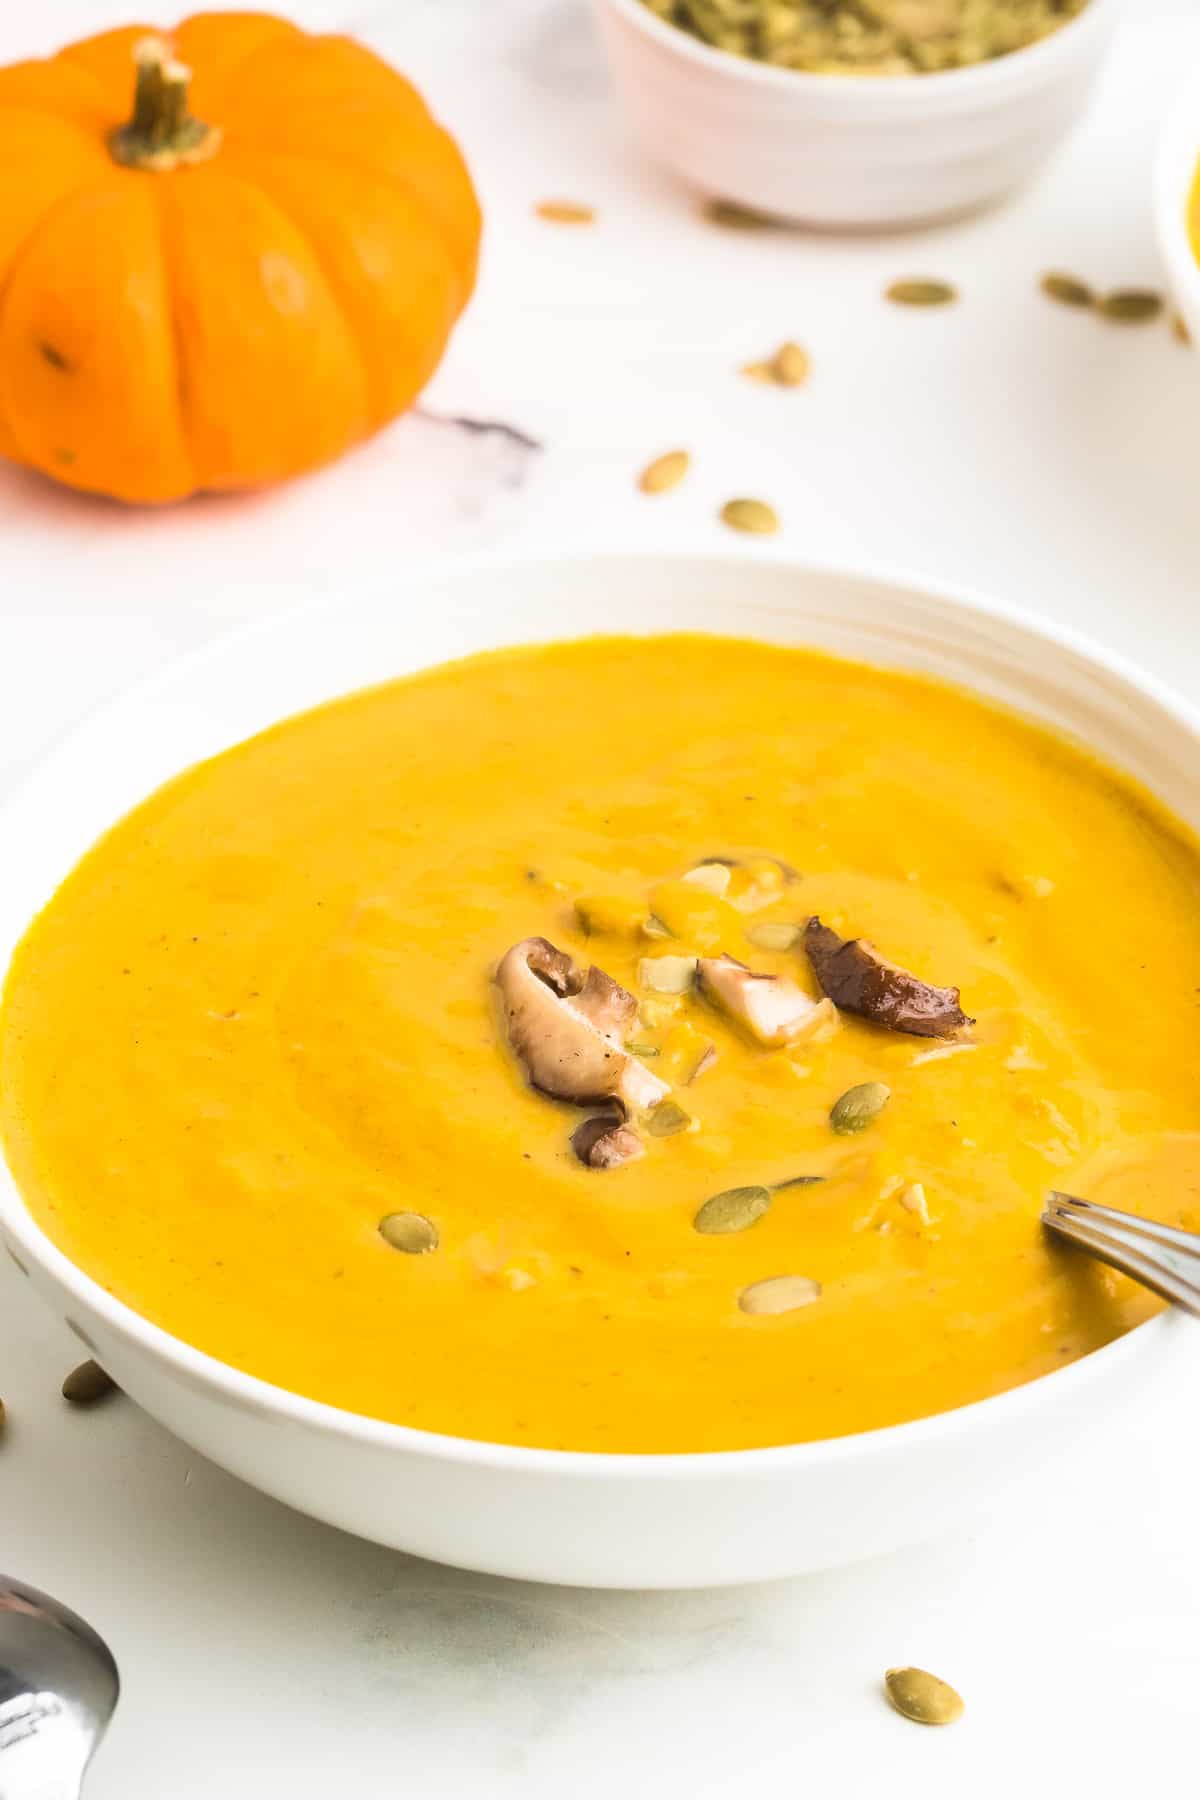 Homemade Pumpkin Soup made with canned pumpkins served in a white bowl.